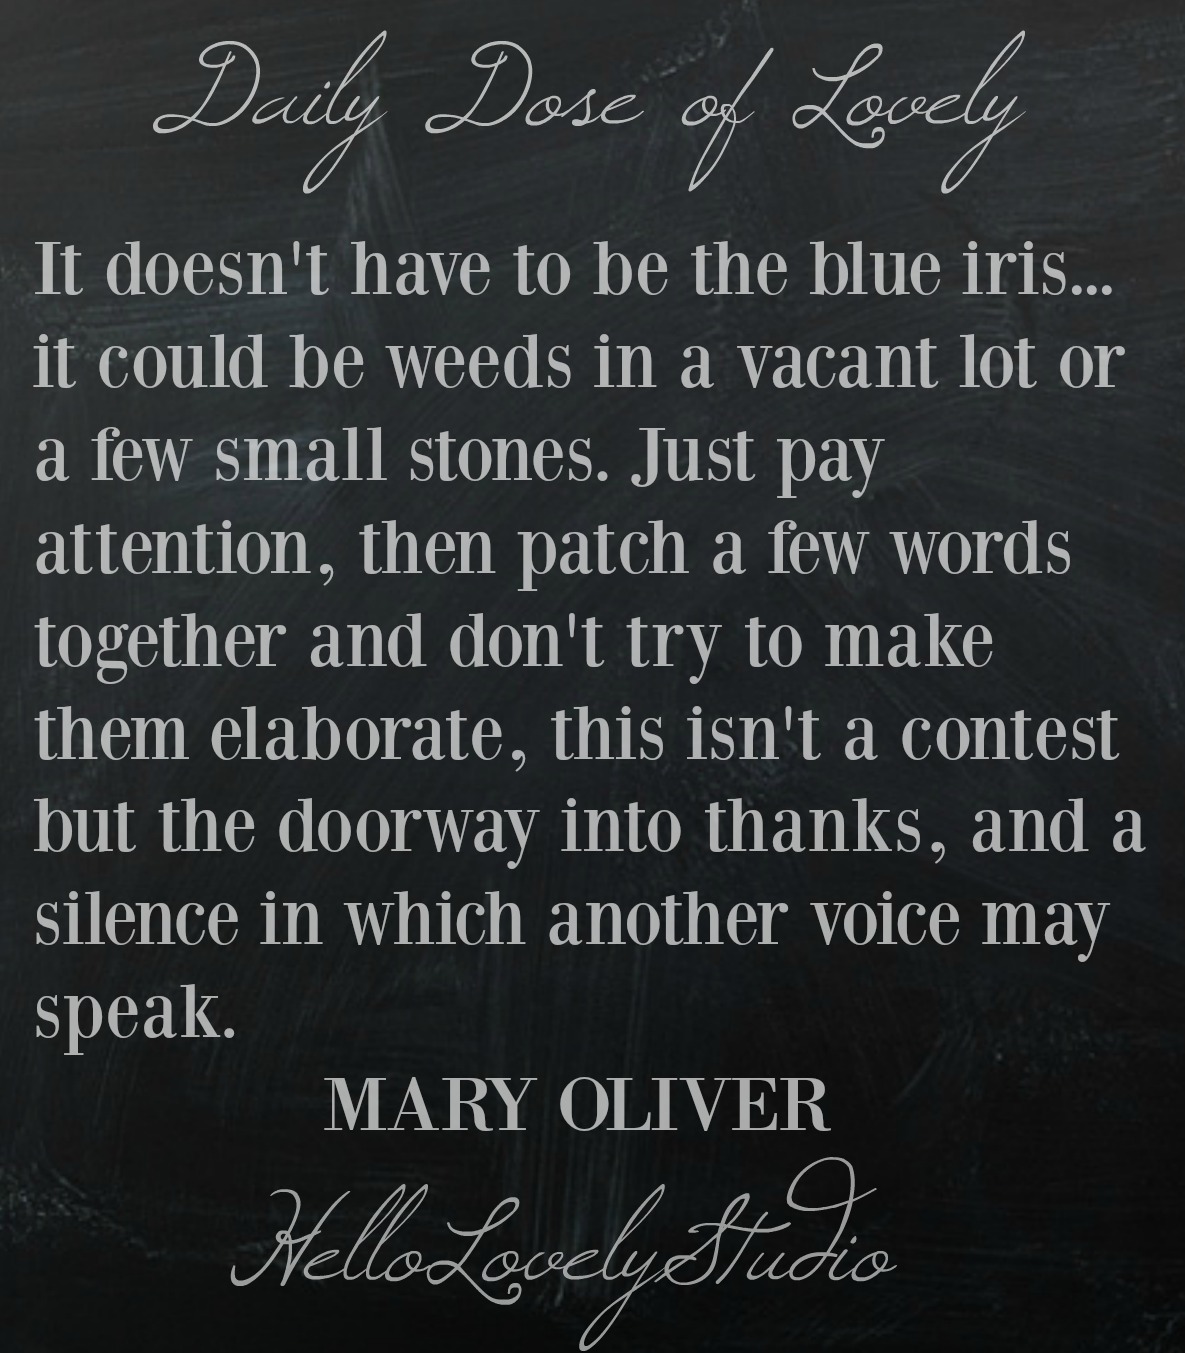 Mary Oliver poetry. It doesn't have to be the blue iris...it could be weeds in a vacant lot or a few small stones. Just pay attention...#maryoliver #poetry #quote #hellolovelystudio